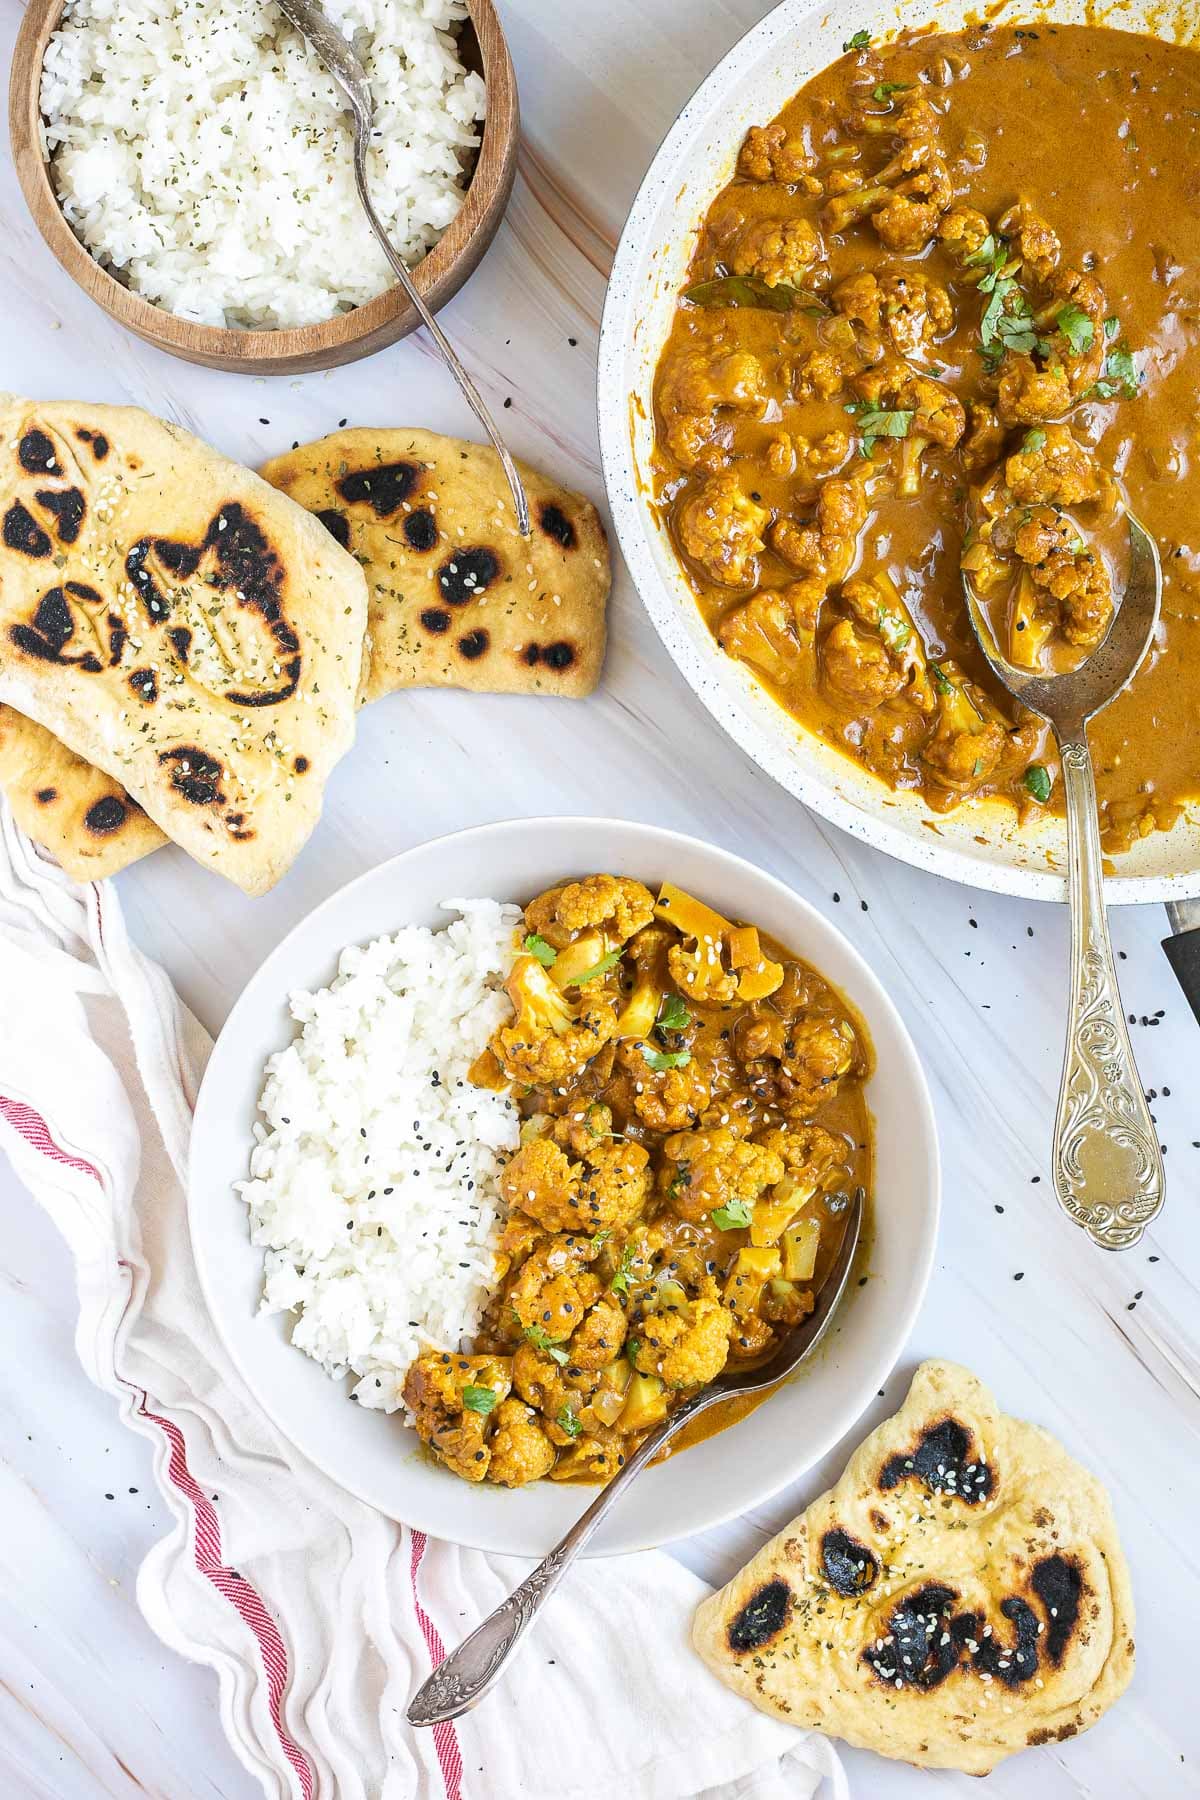 A white plate with white rice and cauliflower florets in a creamy orange sauce sprinkled freshly chopped cilantro. A spoon is placed inside. Naan bread, a bowl of rice, and leftover cauliflower korma are next to it.